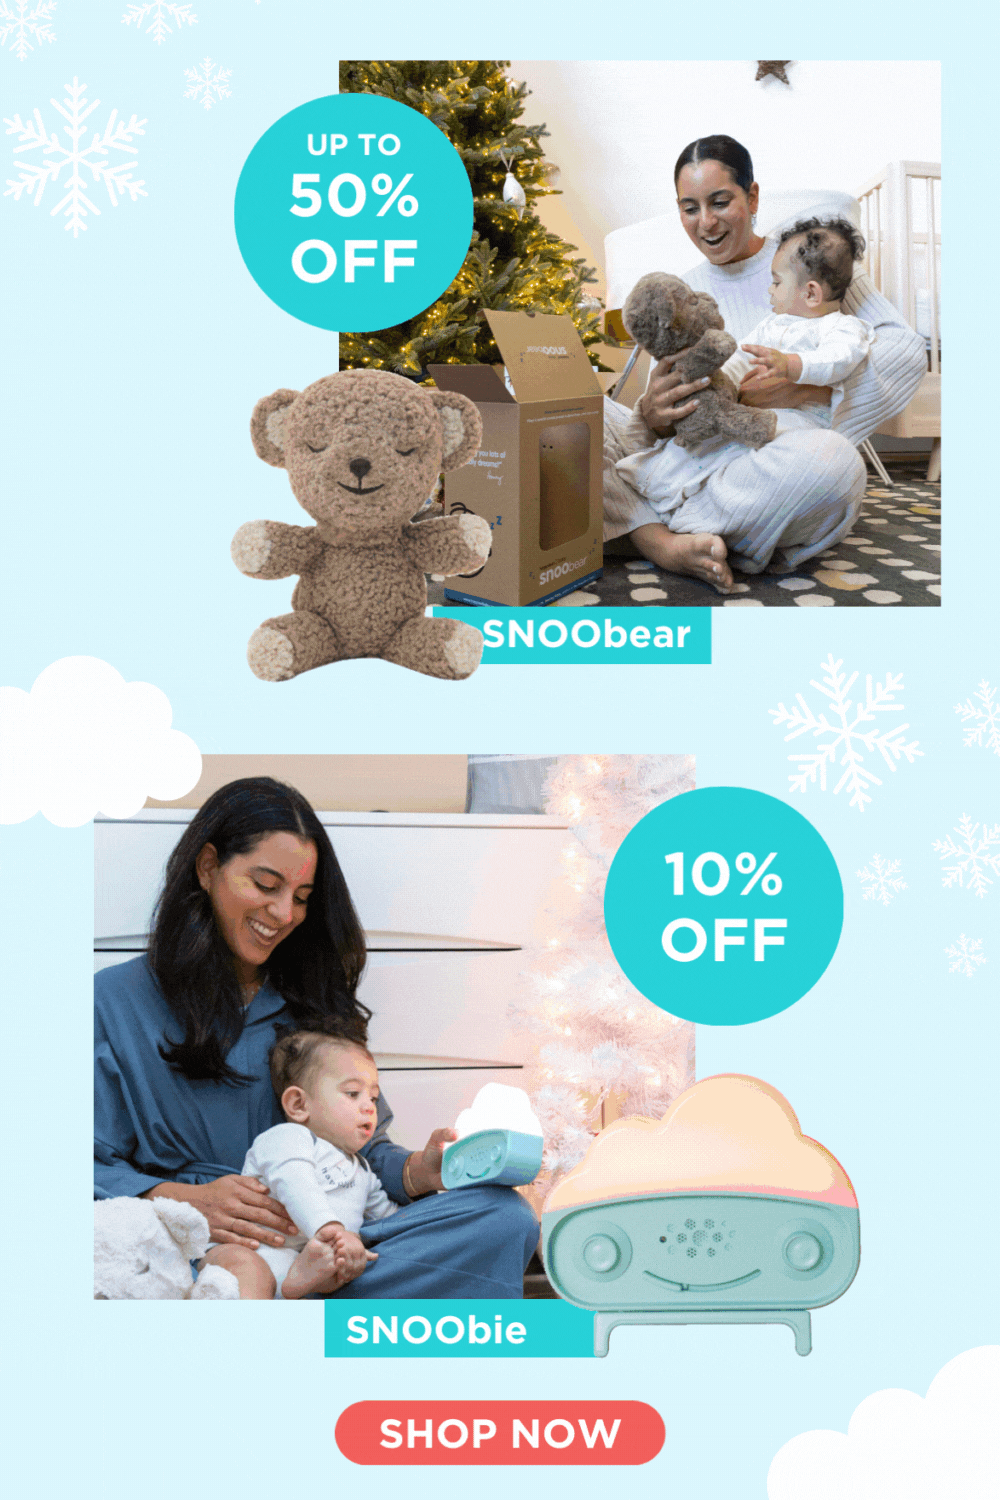 UP TO 50% OFF SNOObear. 10% OFF SNOObie. SHOP NOW